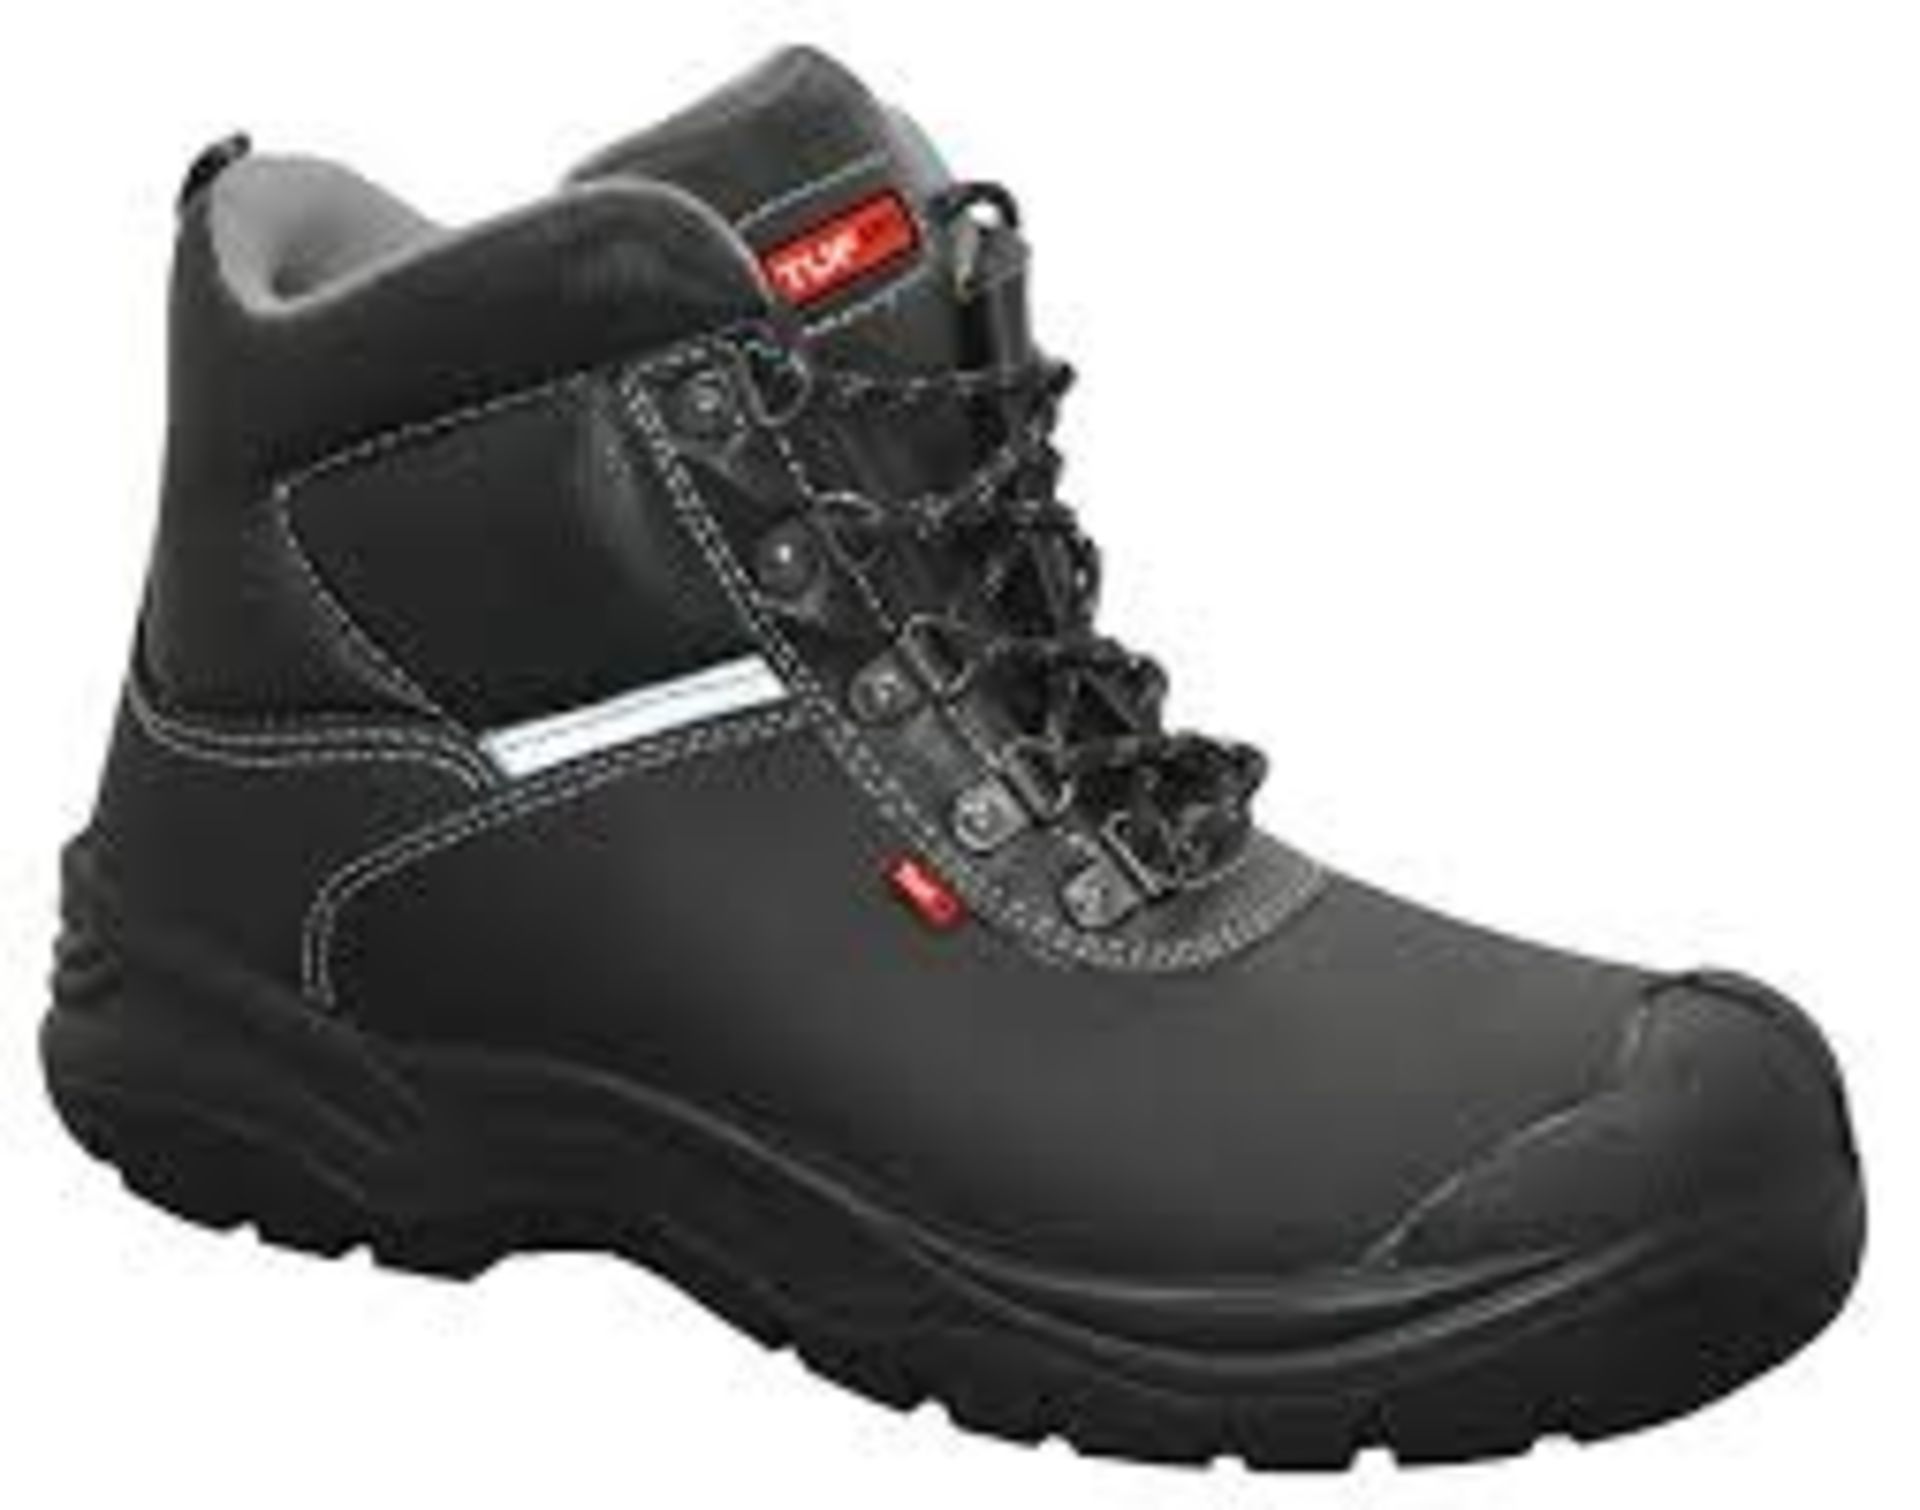 TUFPro Chukka Safety Boot With Scuffcap / Size UK 8 - ER51